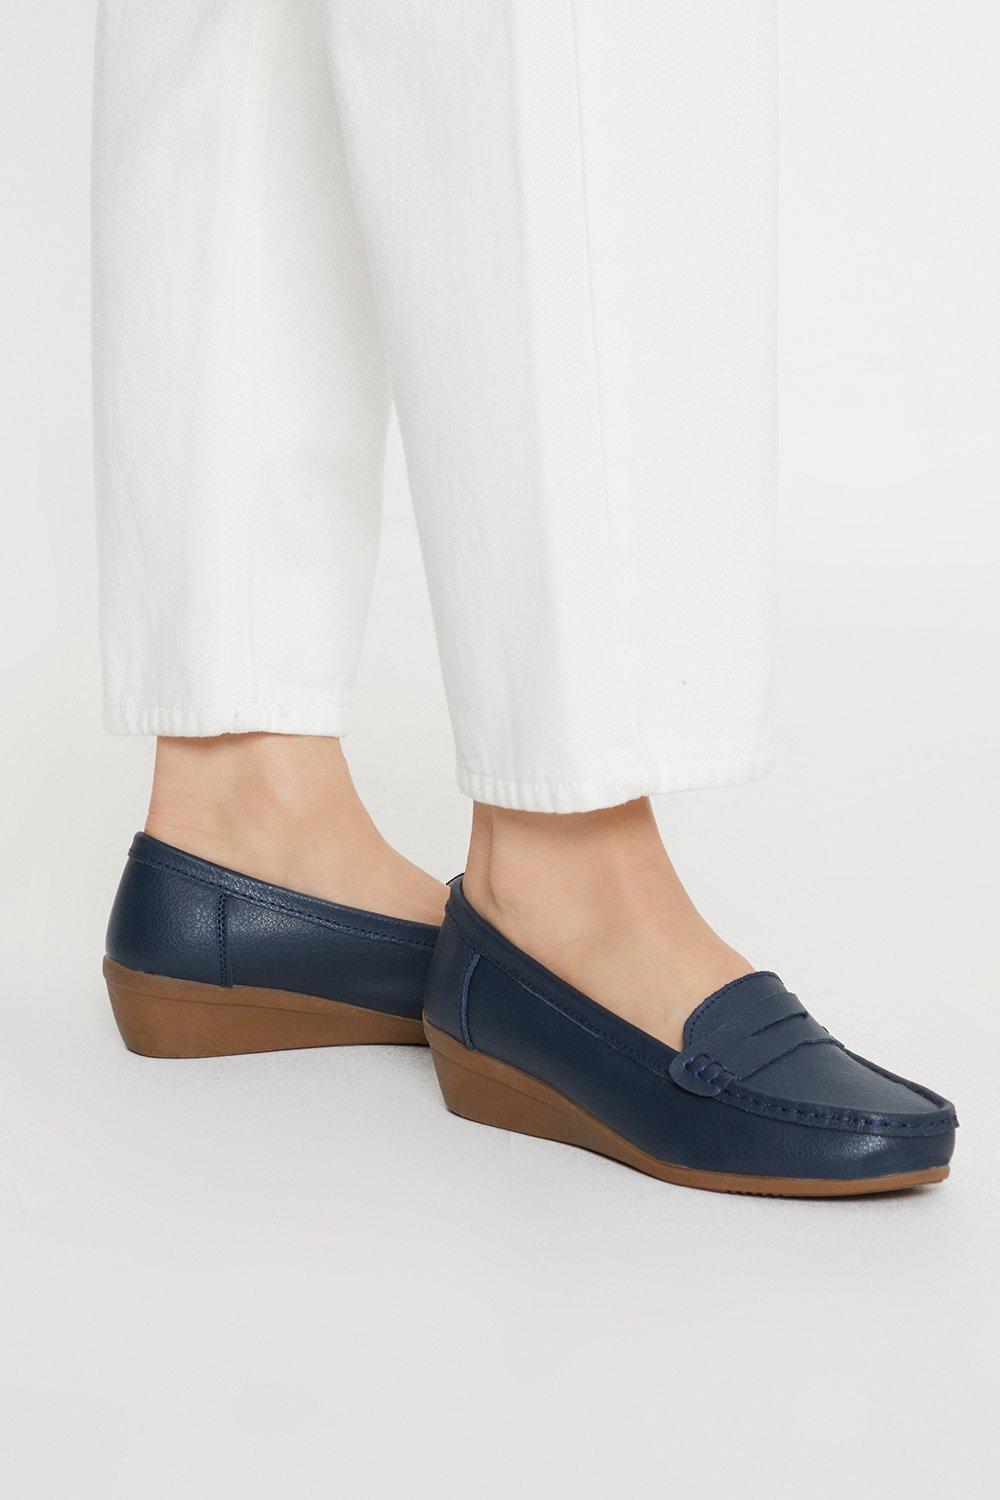 Women’s Good For The Sole: Niamh Wide Fit Leather Comfort Loafers - navy - 7